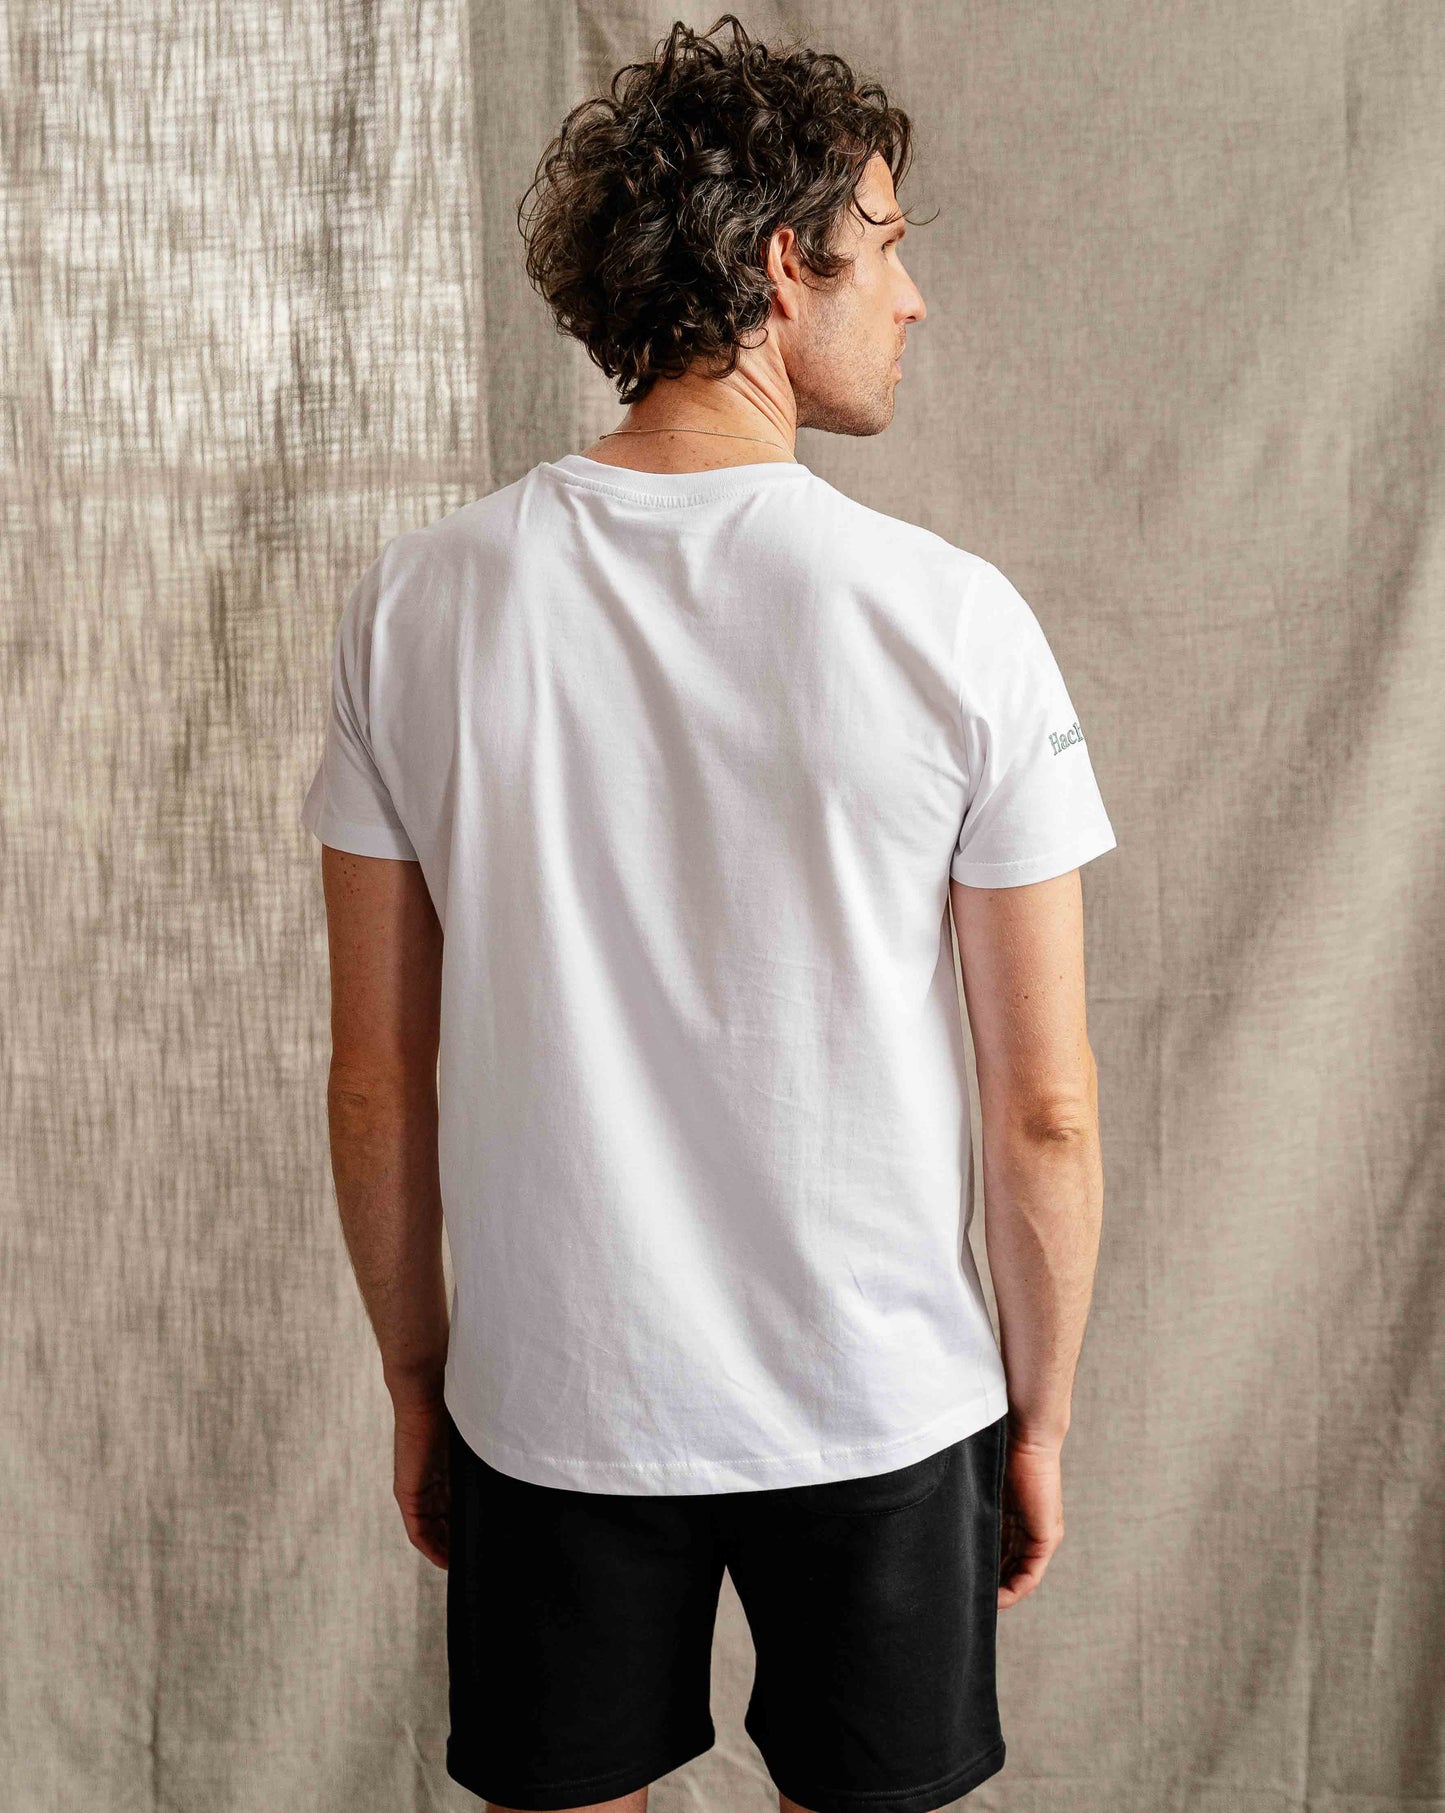 Man wearing Hachure Active white t-shirt with green logo embroidery 